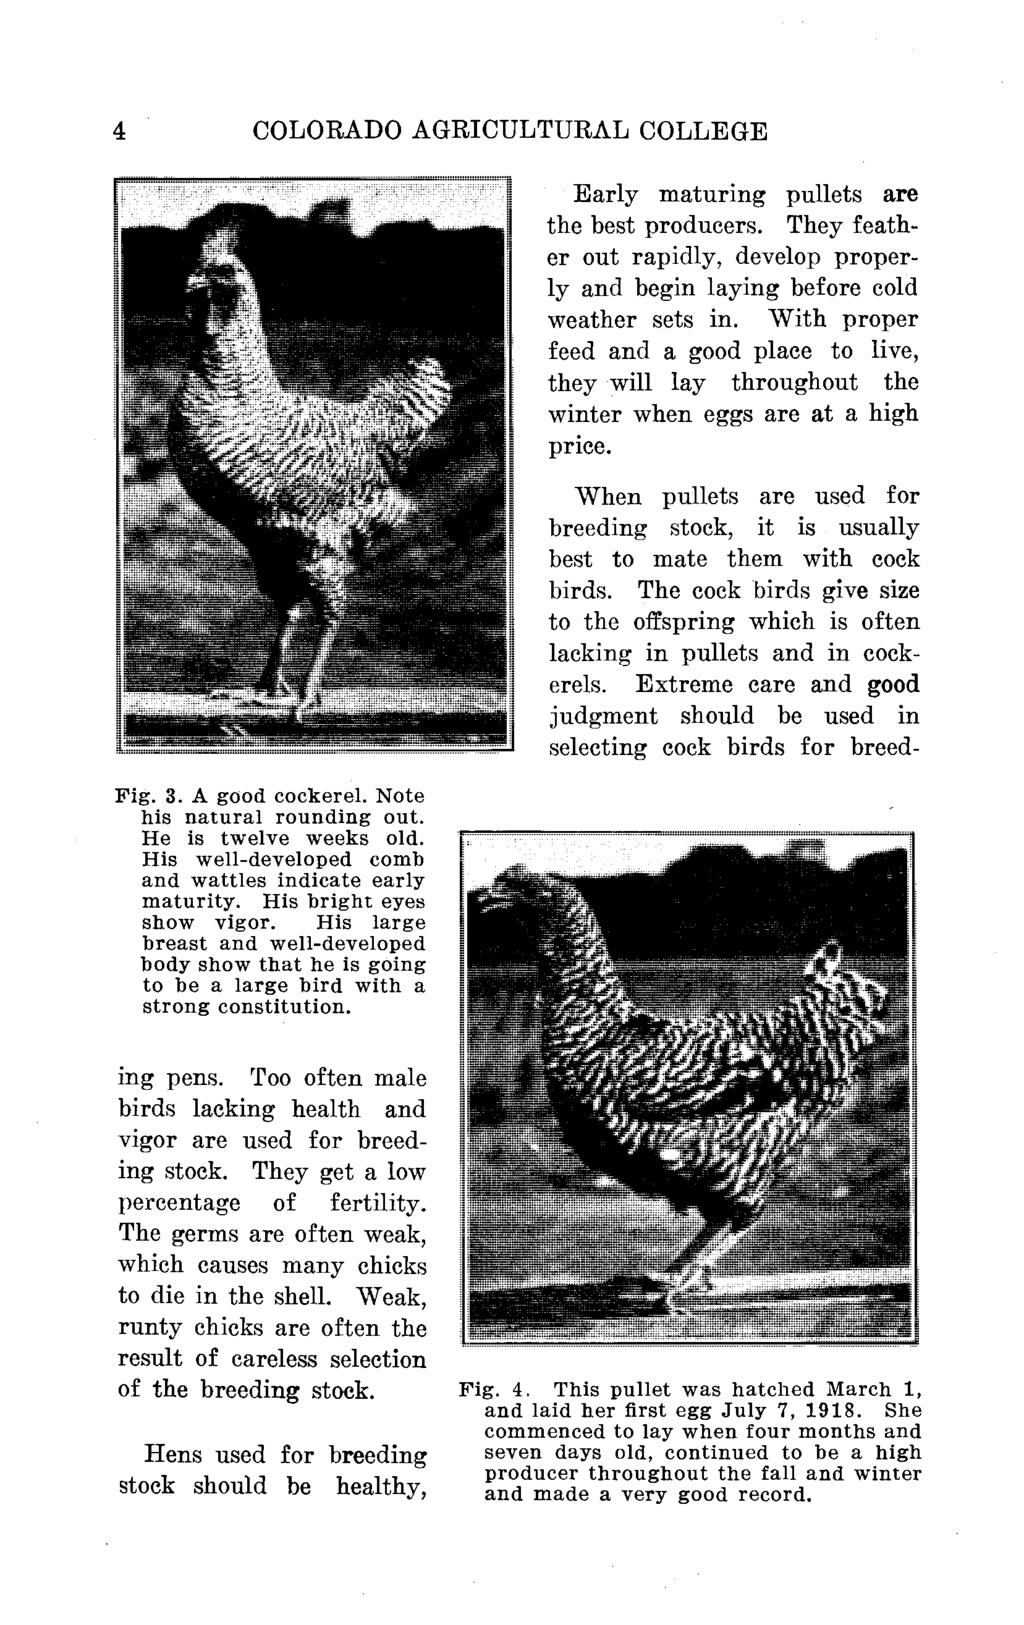 4 COLORADO AGRICULTURAL COLLEGE Fig. 3. A good cockerel. Note his natural rounding out. He is twelve weeks old. His well-developed comb and wattles indicate early maturity. His bright eyes show vigor.